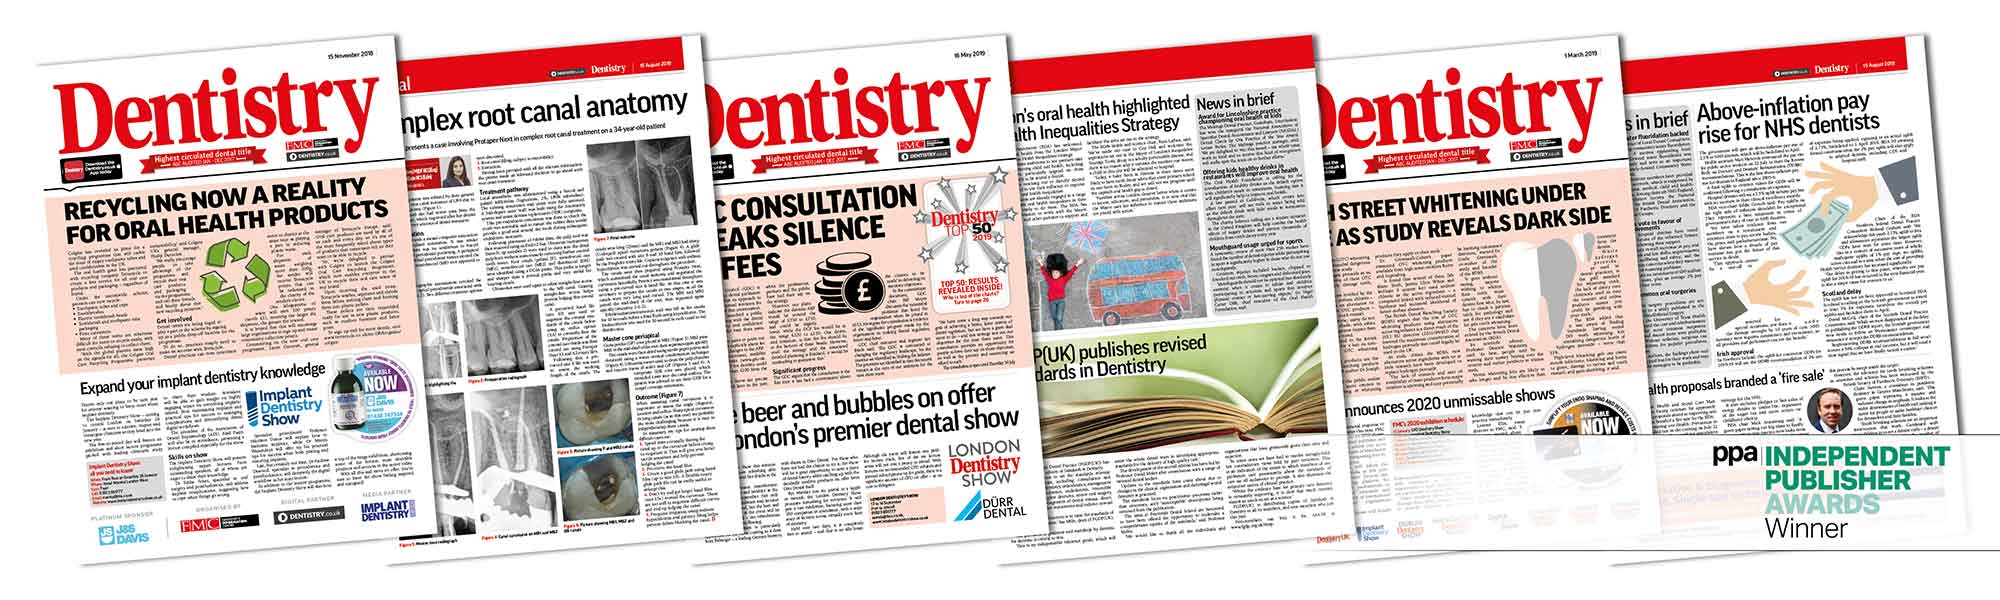 dentistry magazine named Business Publication of the Year